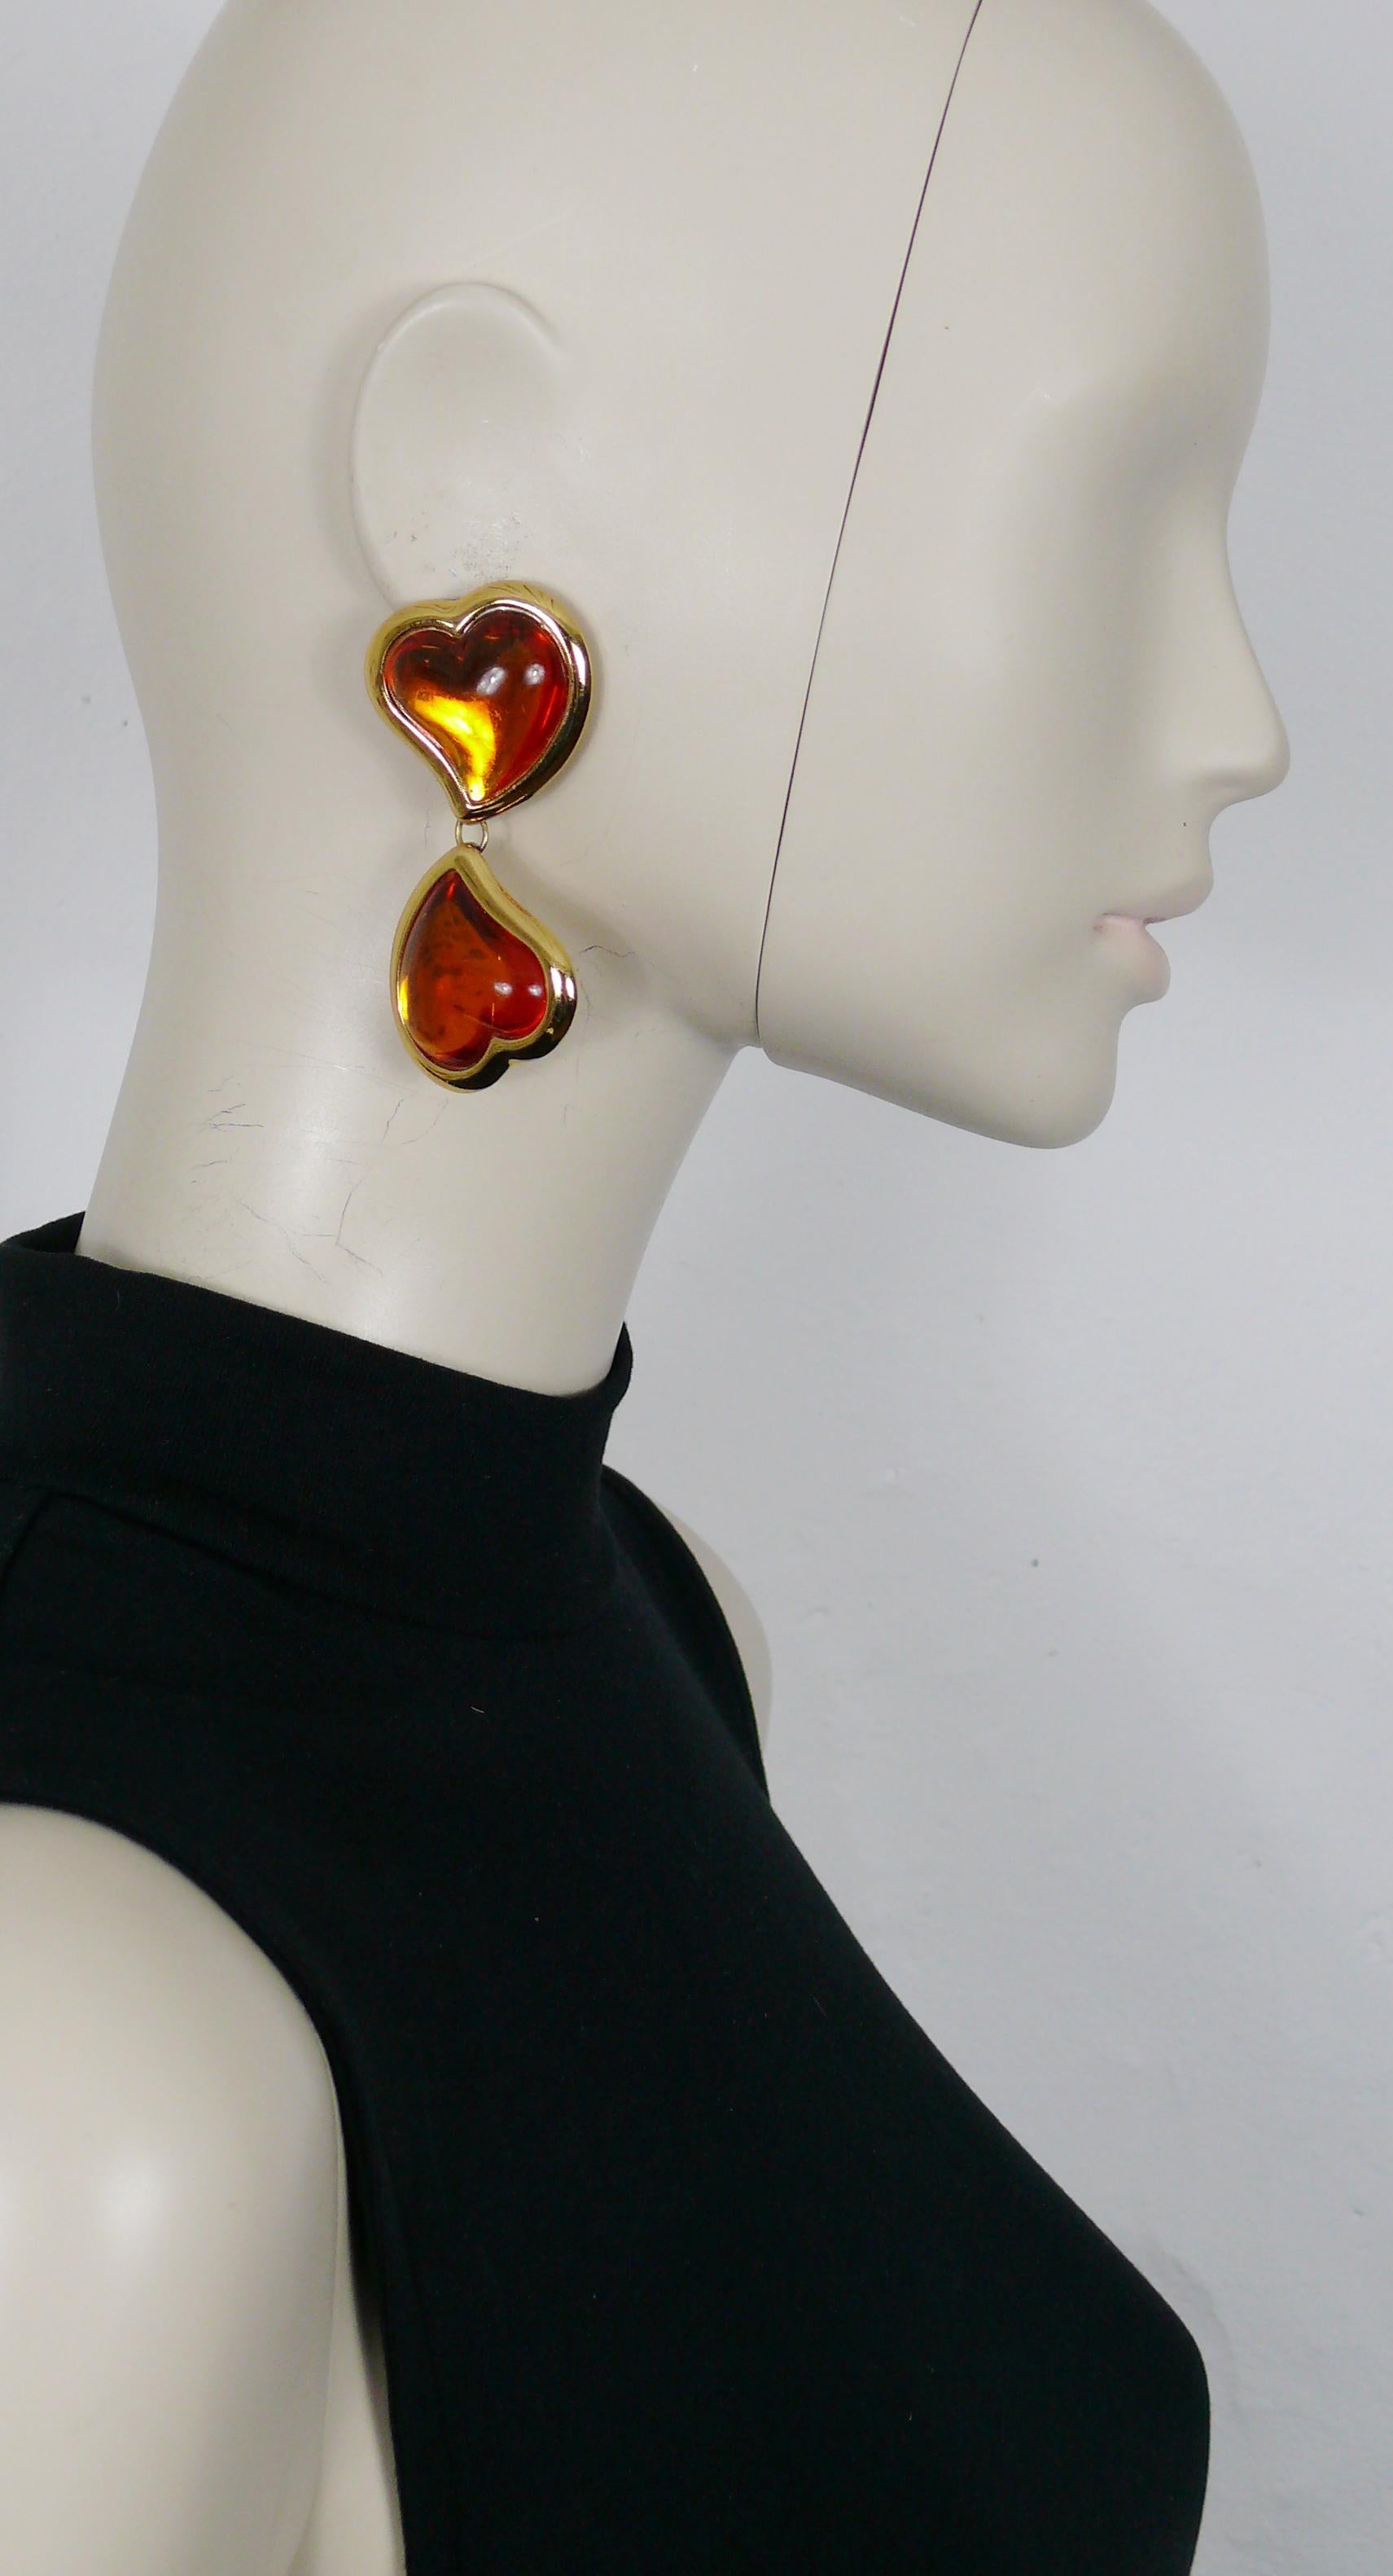 YVES SAINT LAURENT vintage dangling earrings (clip-on) featuring two orange resin cabochon hearts in a gold toned setting.

Embossed YSL Made in France.

Indicative measurements : height approx. 7.5 cm (2.95 inches) / max. width approx 3.4 cm (1.34